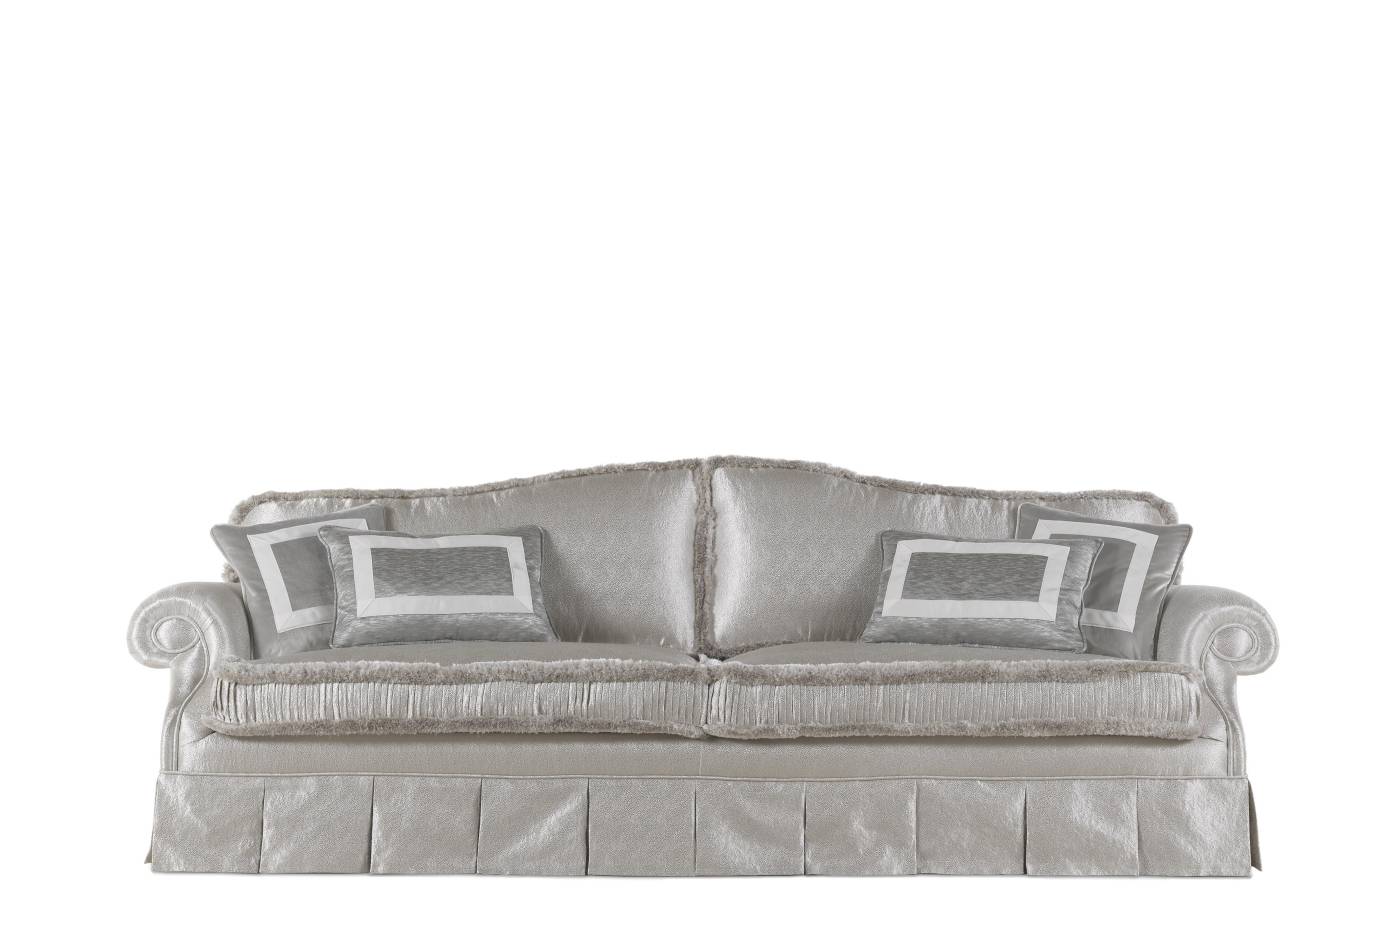 BELUGA 2-seater sofa - 3-seater sofa – Jumbo Collection Italian luxury classic sofas. tailor-made interior design projects to meet all your furnishing needs